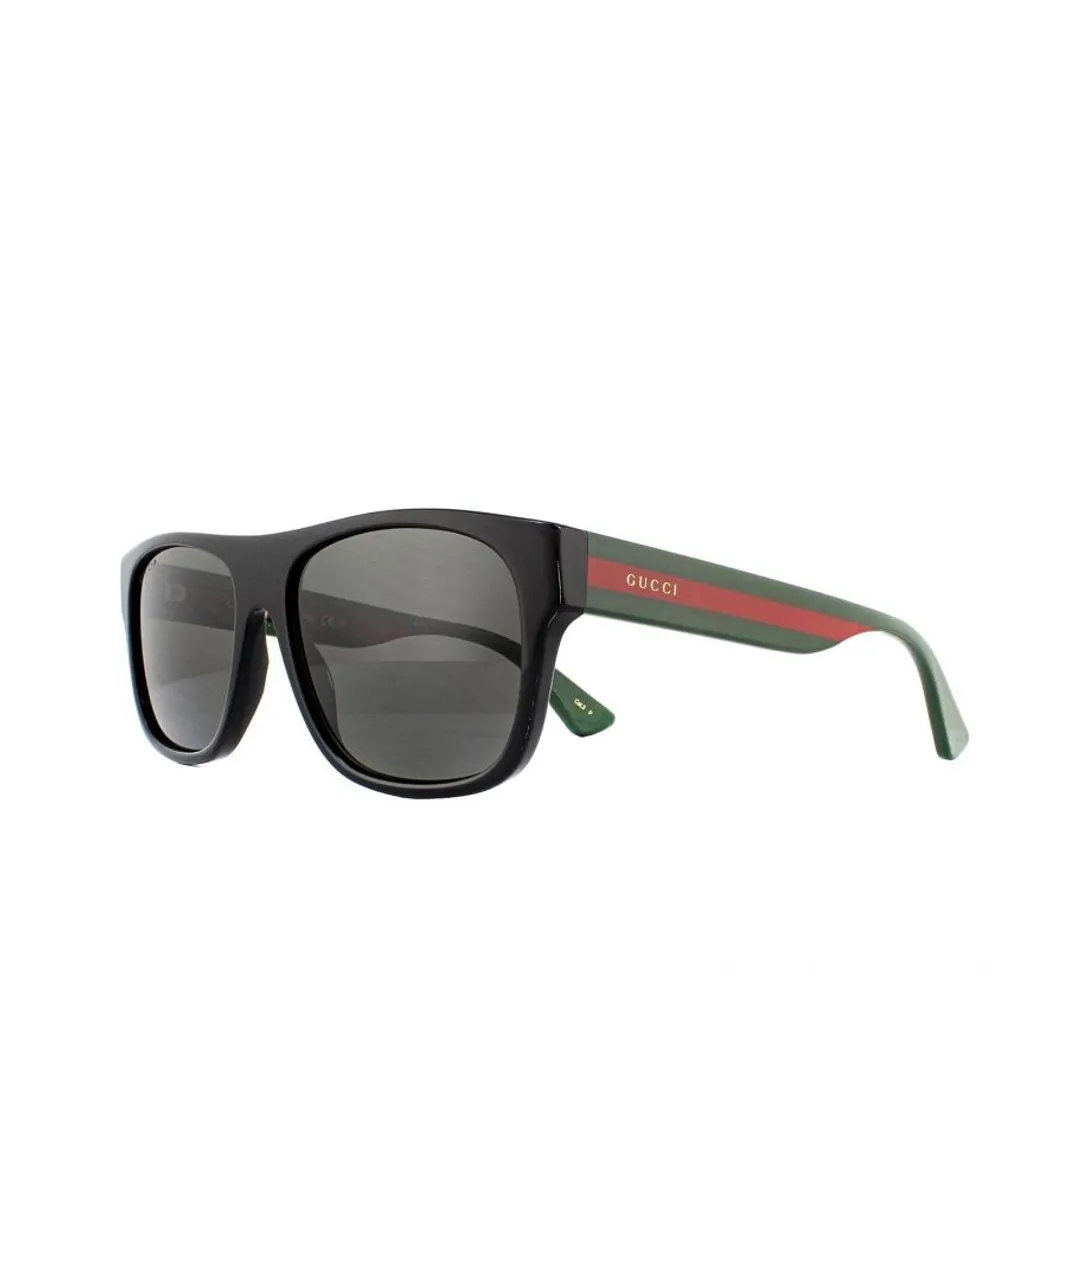 Gucci Rectangle Mens Black with Green and Red Stripe Grey Polarized Sunglasses - One